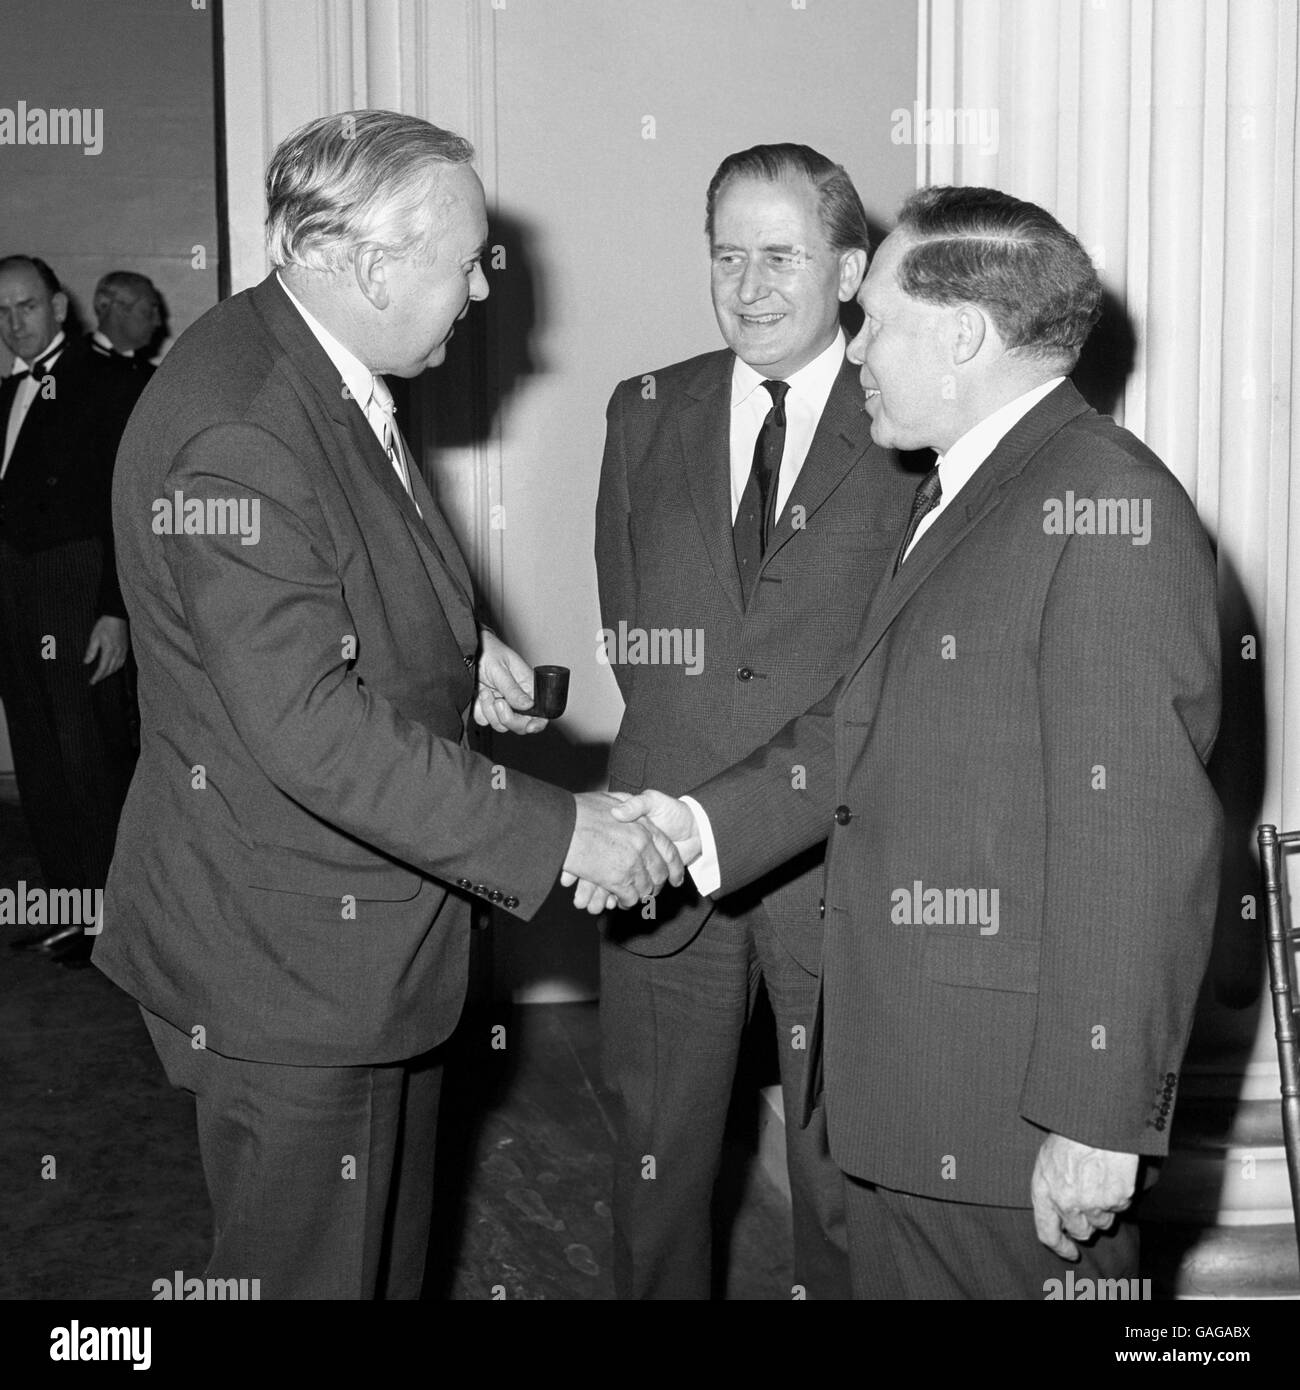 Harold Wilson greeted by Leslie Williams, Secretary General of the National Staff Side and Vice-Chairman of the National Whitley Council, at the Banqueting House, Whitehall, when the Prime Minister was a guest at a reception to celebrate the 50th anniversary of Whitley is (basis of staff-management relations) in the Civil Service. Centre is Sir William Armstrong, Head of the Home Civil Service and Chairman of the National Whitley Council. Stock Photo